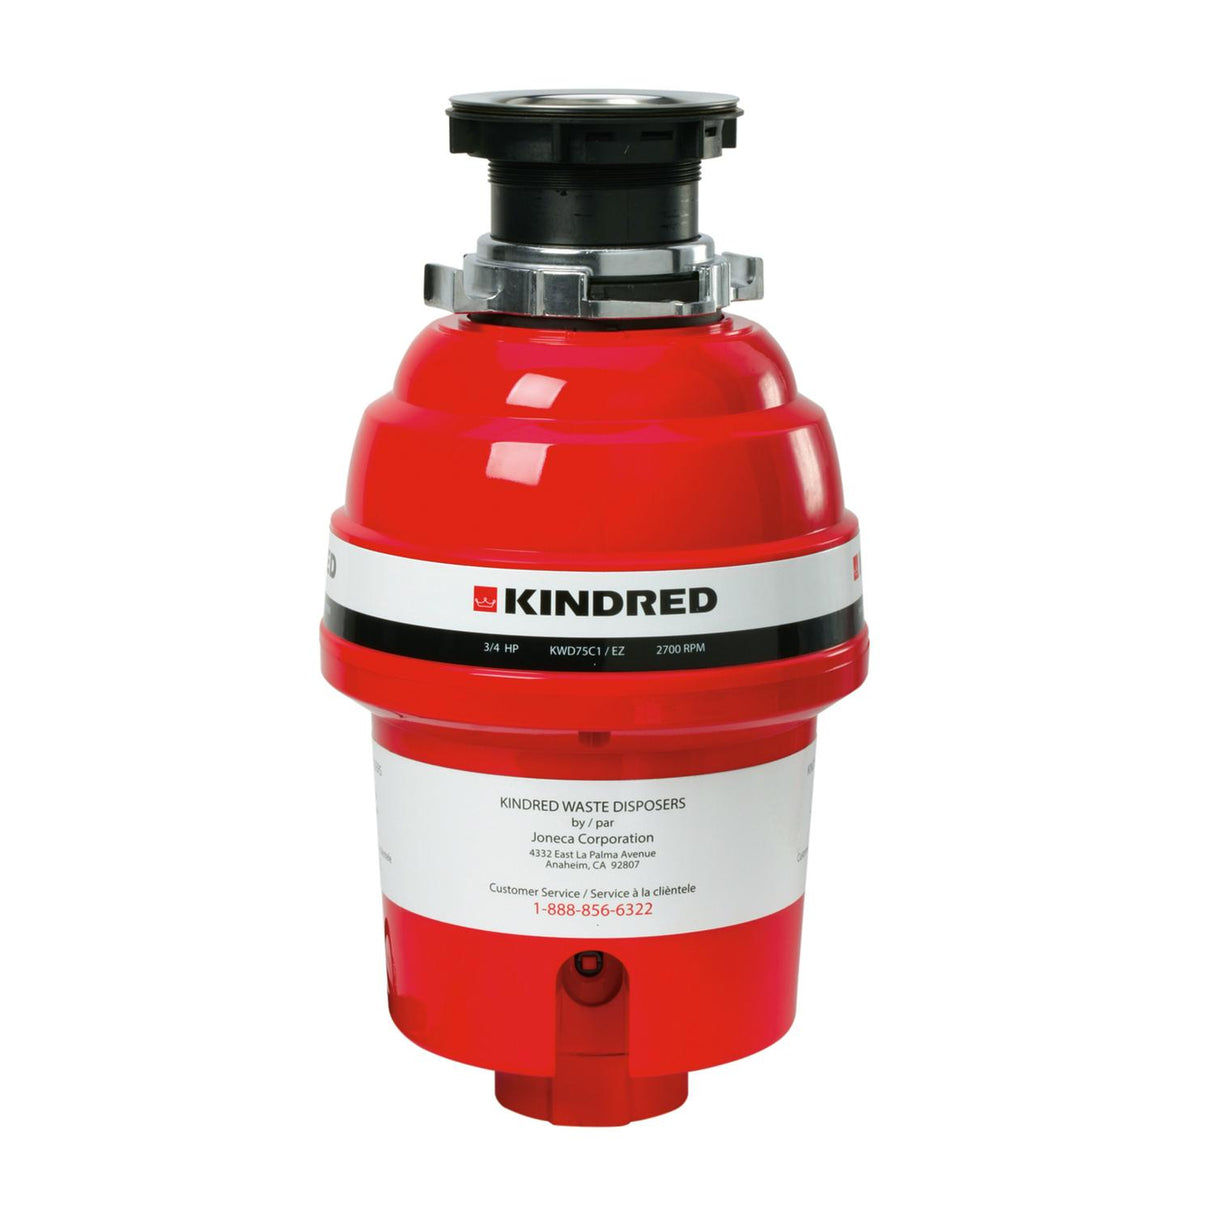 KINDRED KWD75C1-EZ 3/4 Horse Power Continuous Feed Food Waste Disposer